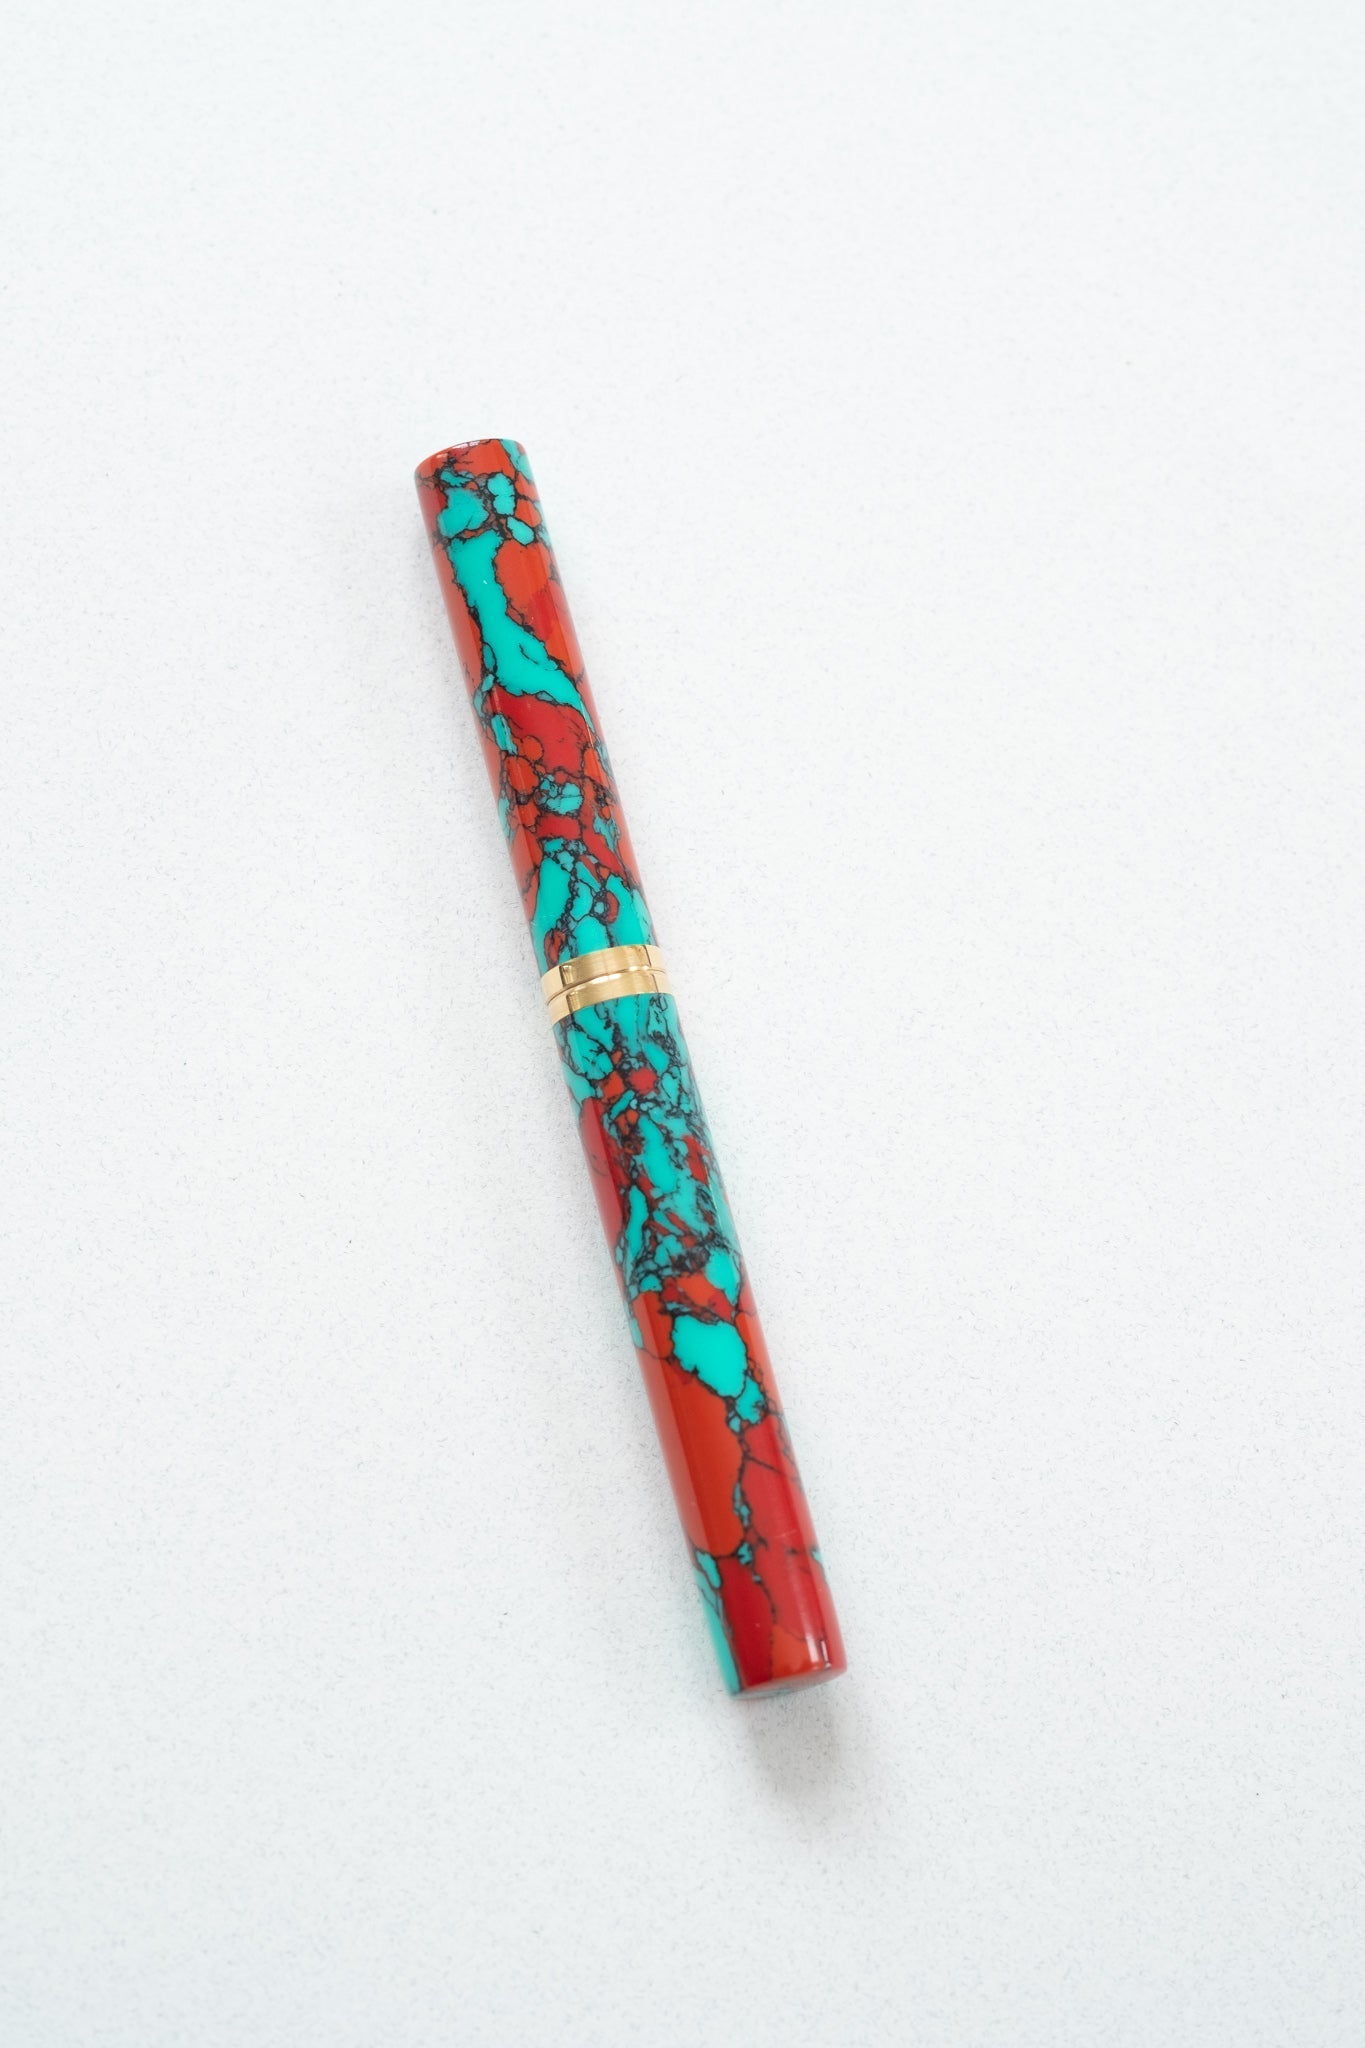 A red jasper Studio pen on a white desk with the lid on